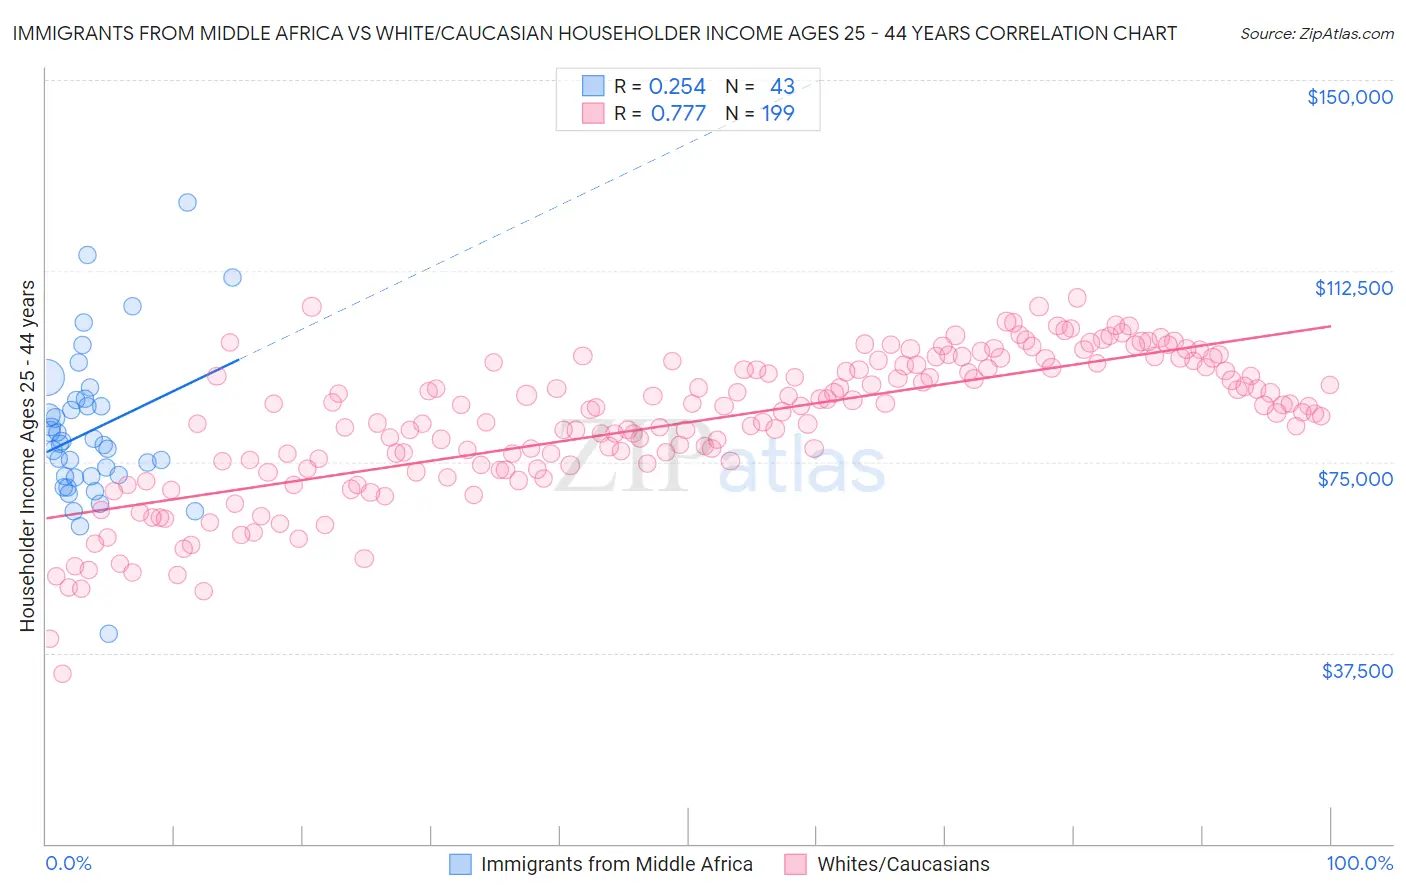 Immigrants from Middle Africa vs White/Caucasian Householder Income Ages 25 - 44 years